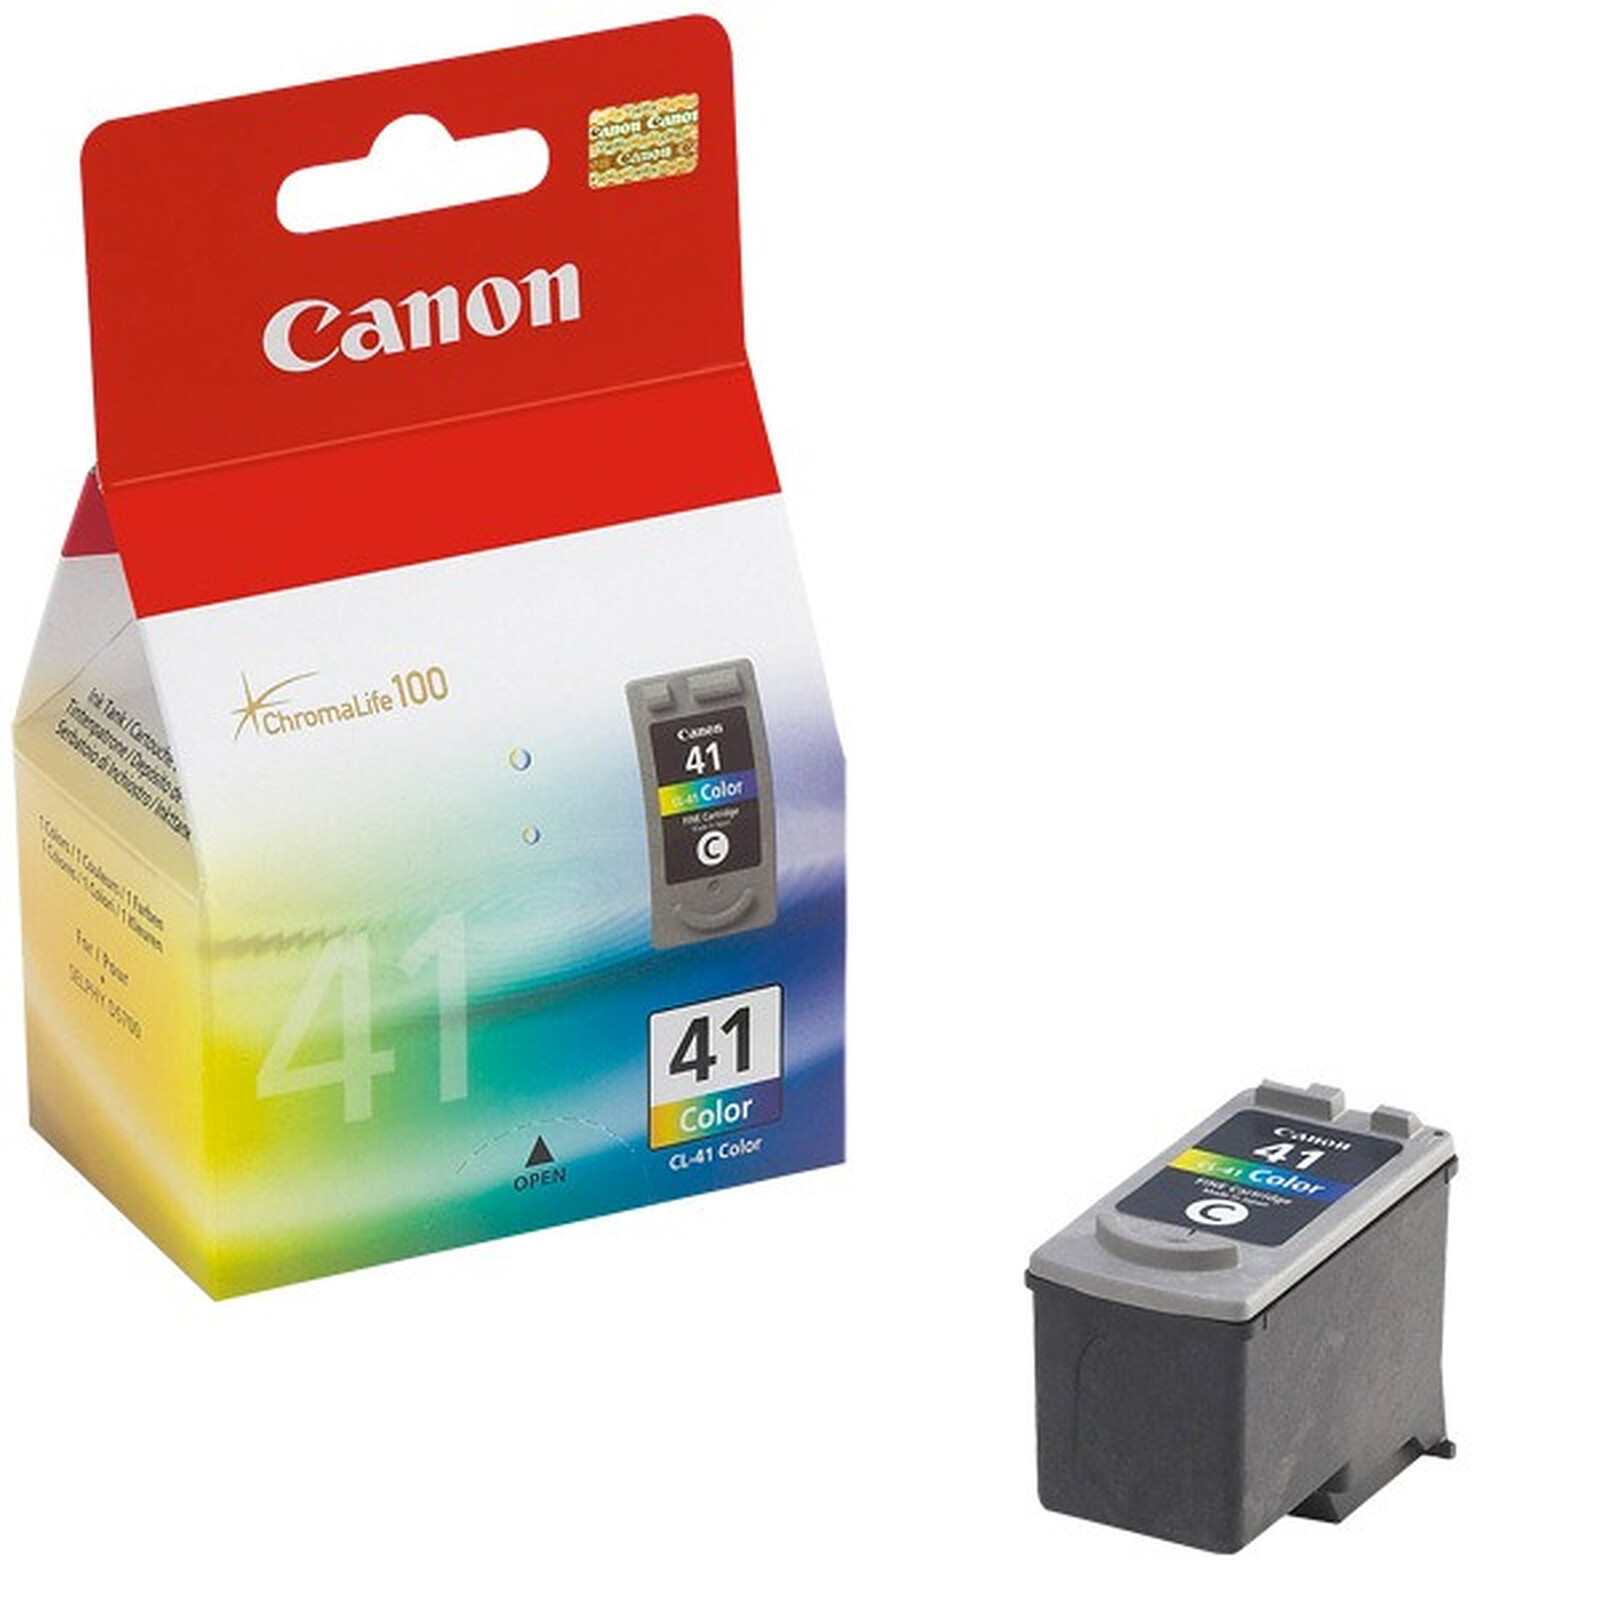 canon mp460 software for mac